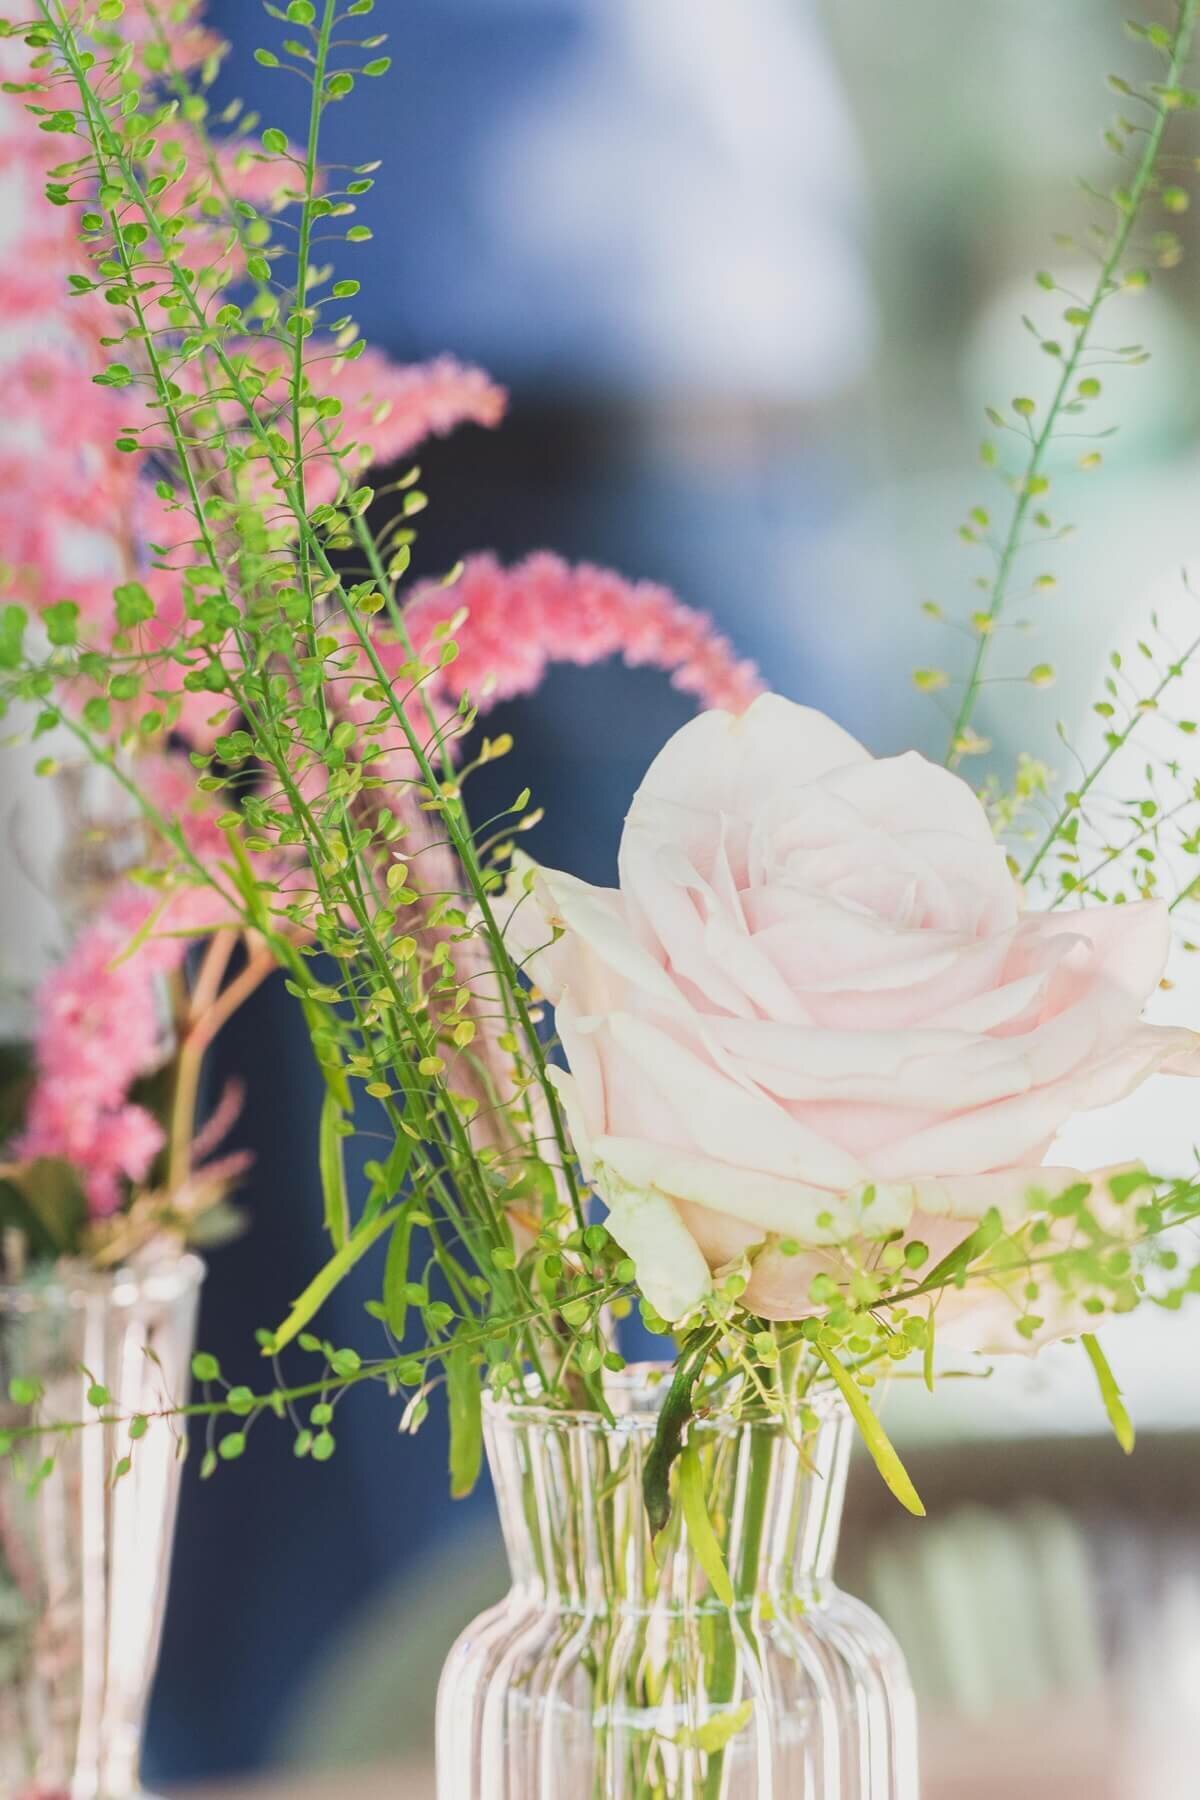 Small floral display in a glass vase